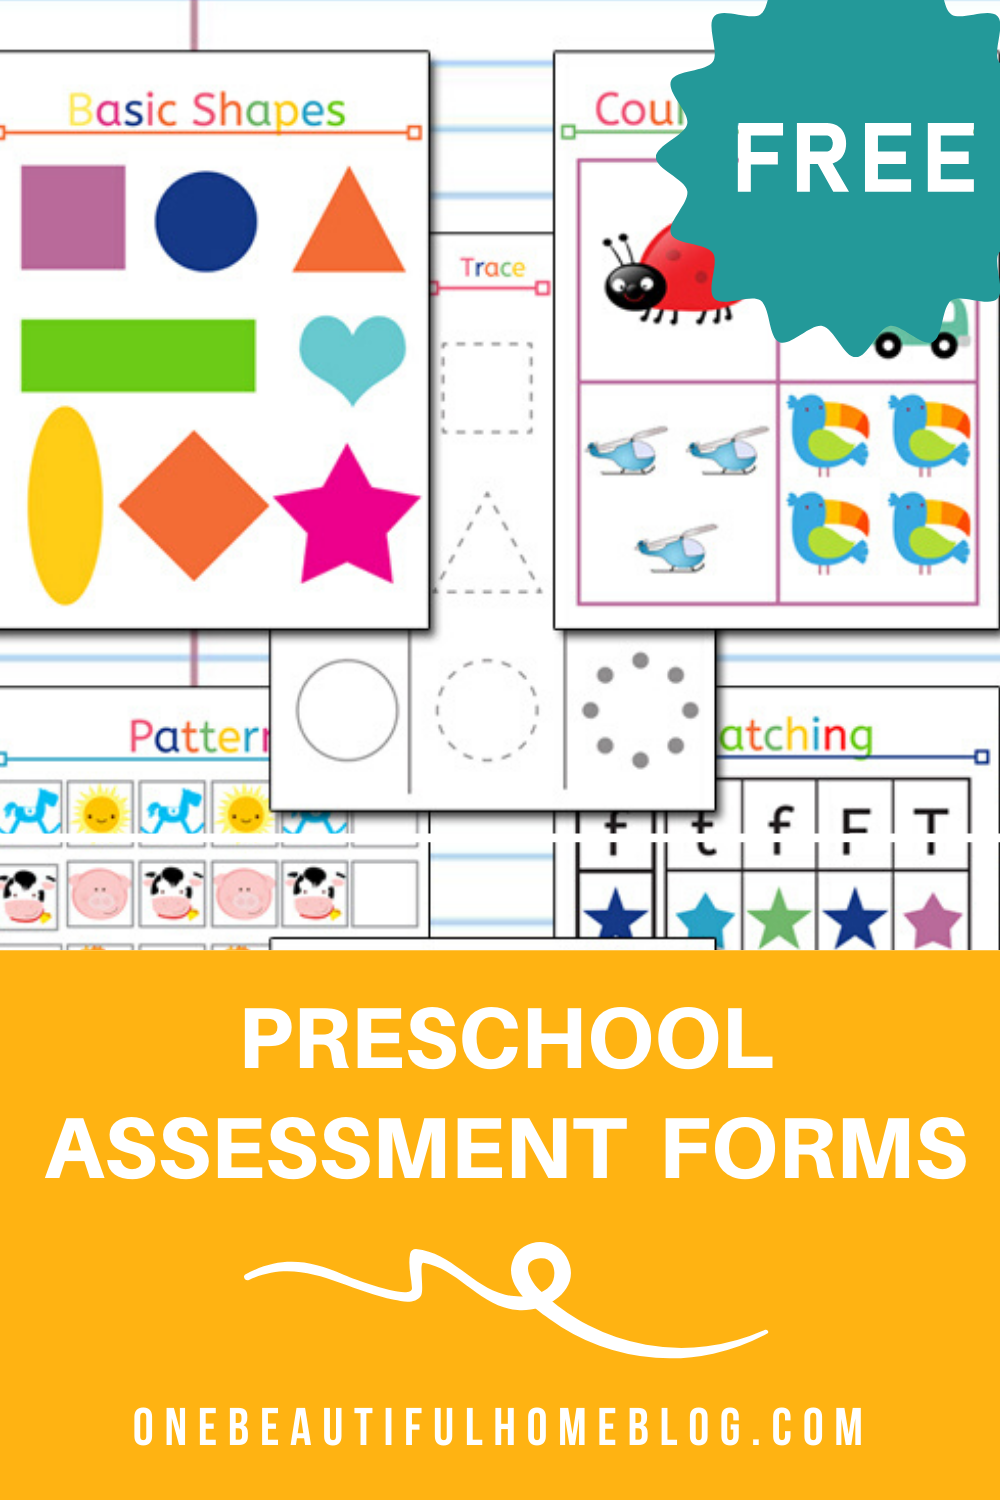 print-this-free-kindergarten-assessment-pack-to-use-as-end-of-the-year